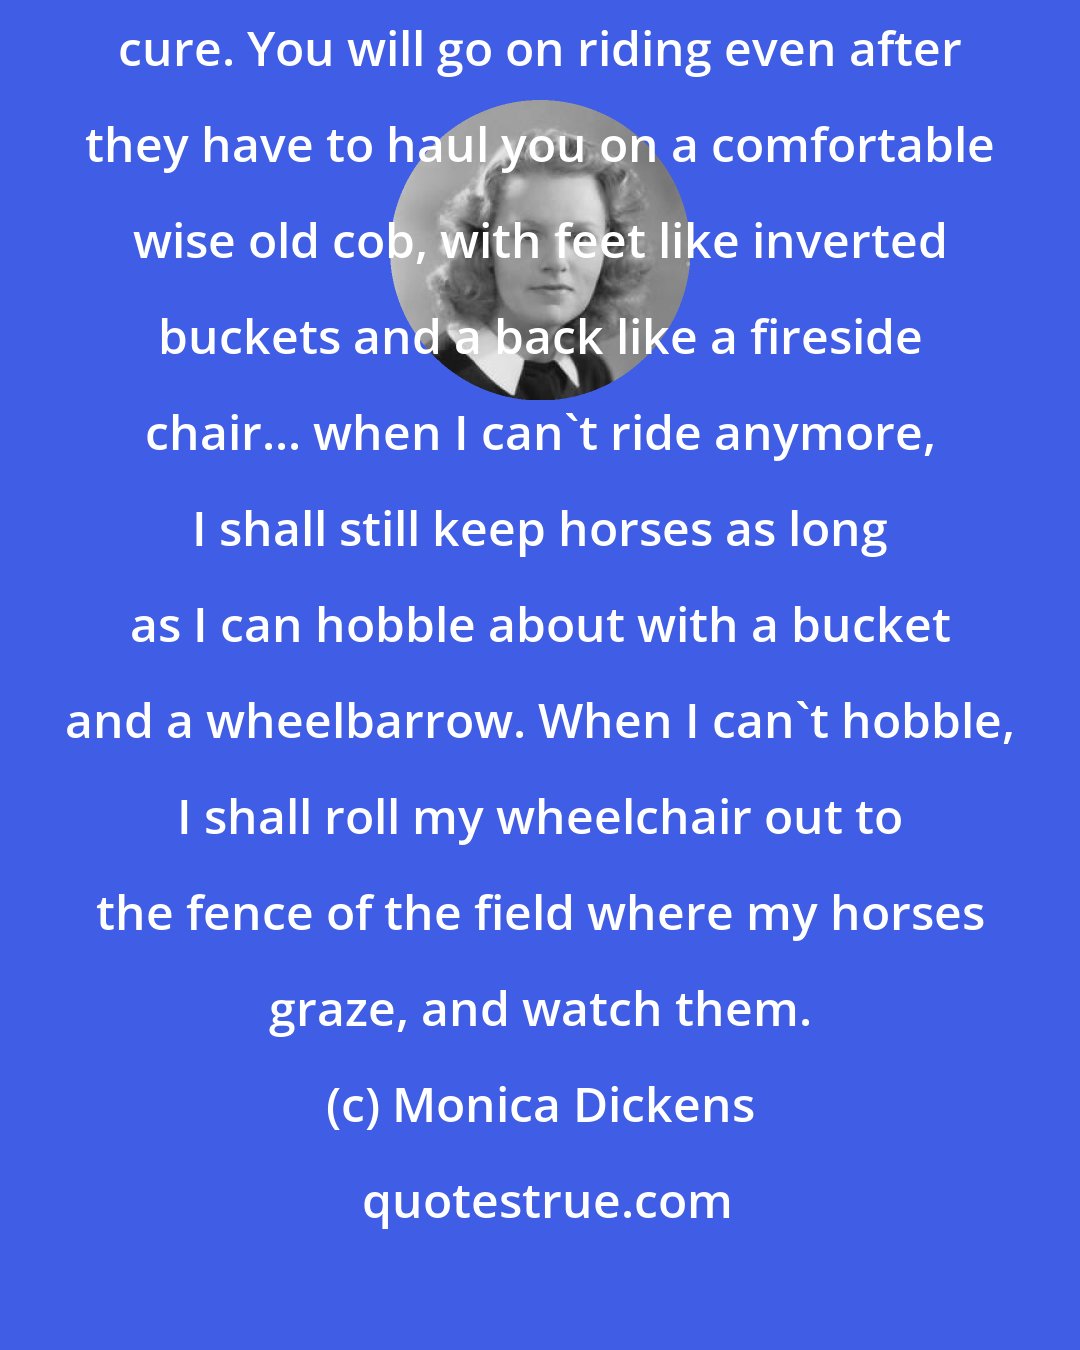 Monica Dickens: If you have it, it is for life. It is a disease for which there is no cure. You will go on riding even after they have to haul you on a comfortable wise old cob, with feet like inverted buckets and a back like a fireside chair... when I can't ride anymore, I shall still keep horses as long as I can hobble about with a bucket and a wheelbarrow. When I can't hobble, I shall roll my wheelchair out to the fence of the field where my horses graze, and watch them.